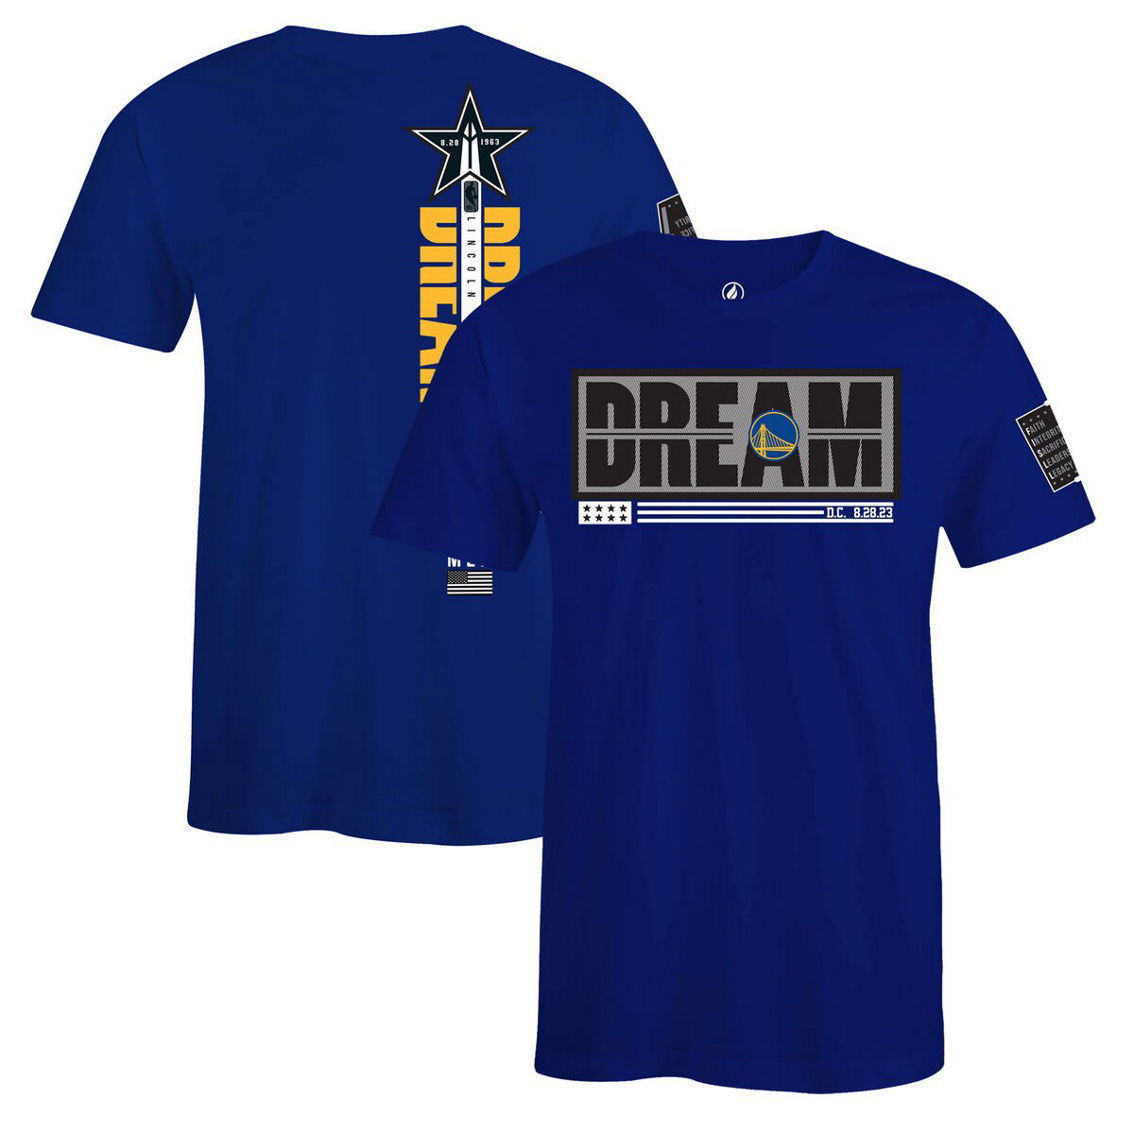 FISLL Unisex x Black History Collection Royal Golden State Warriors T-Shirt - Image 2 of 4